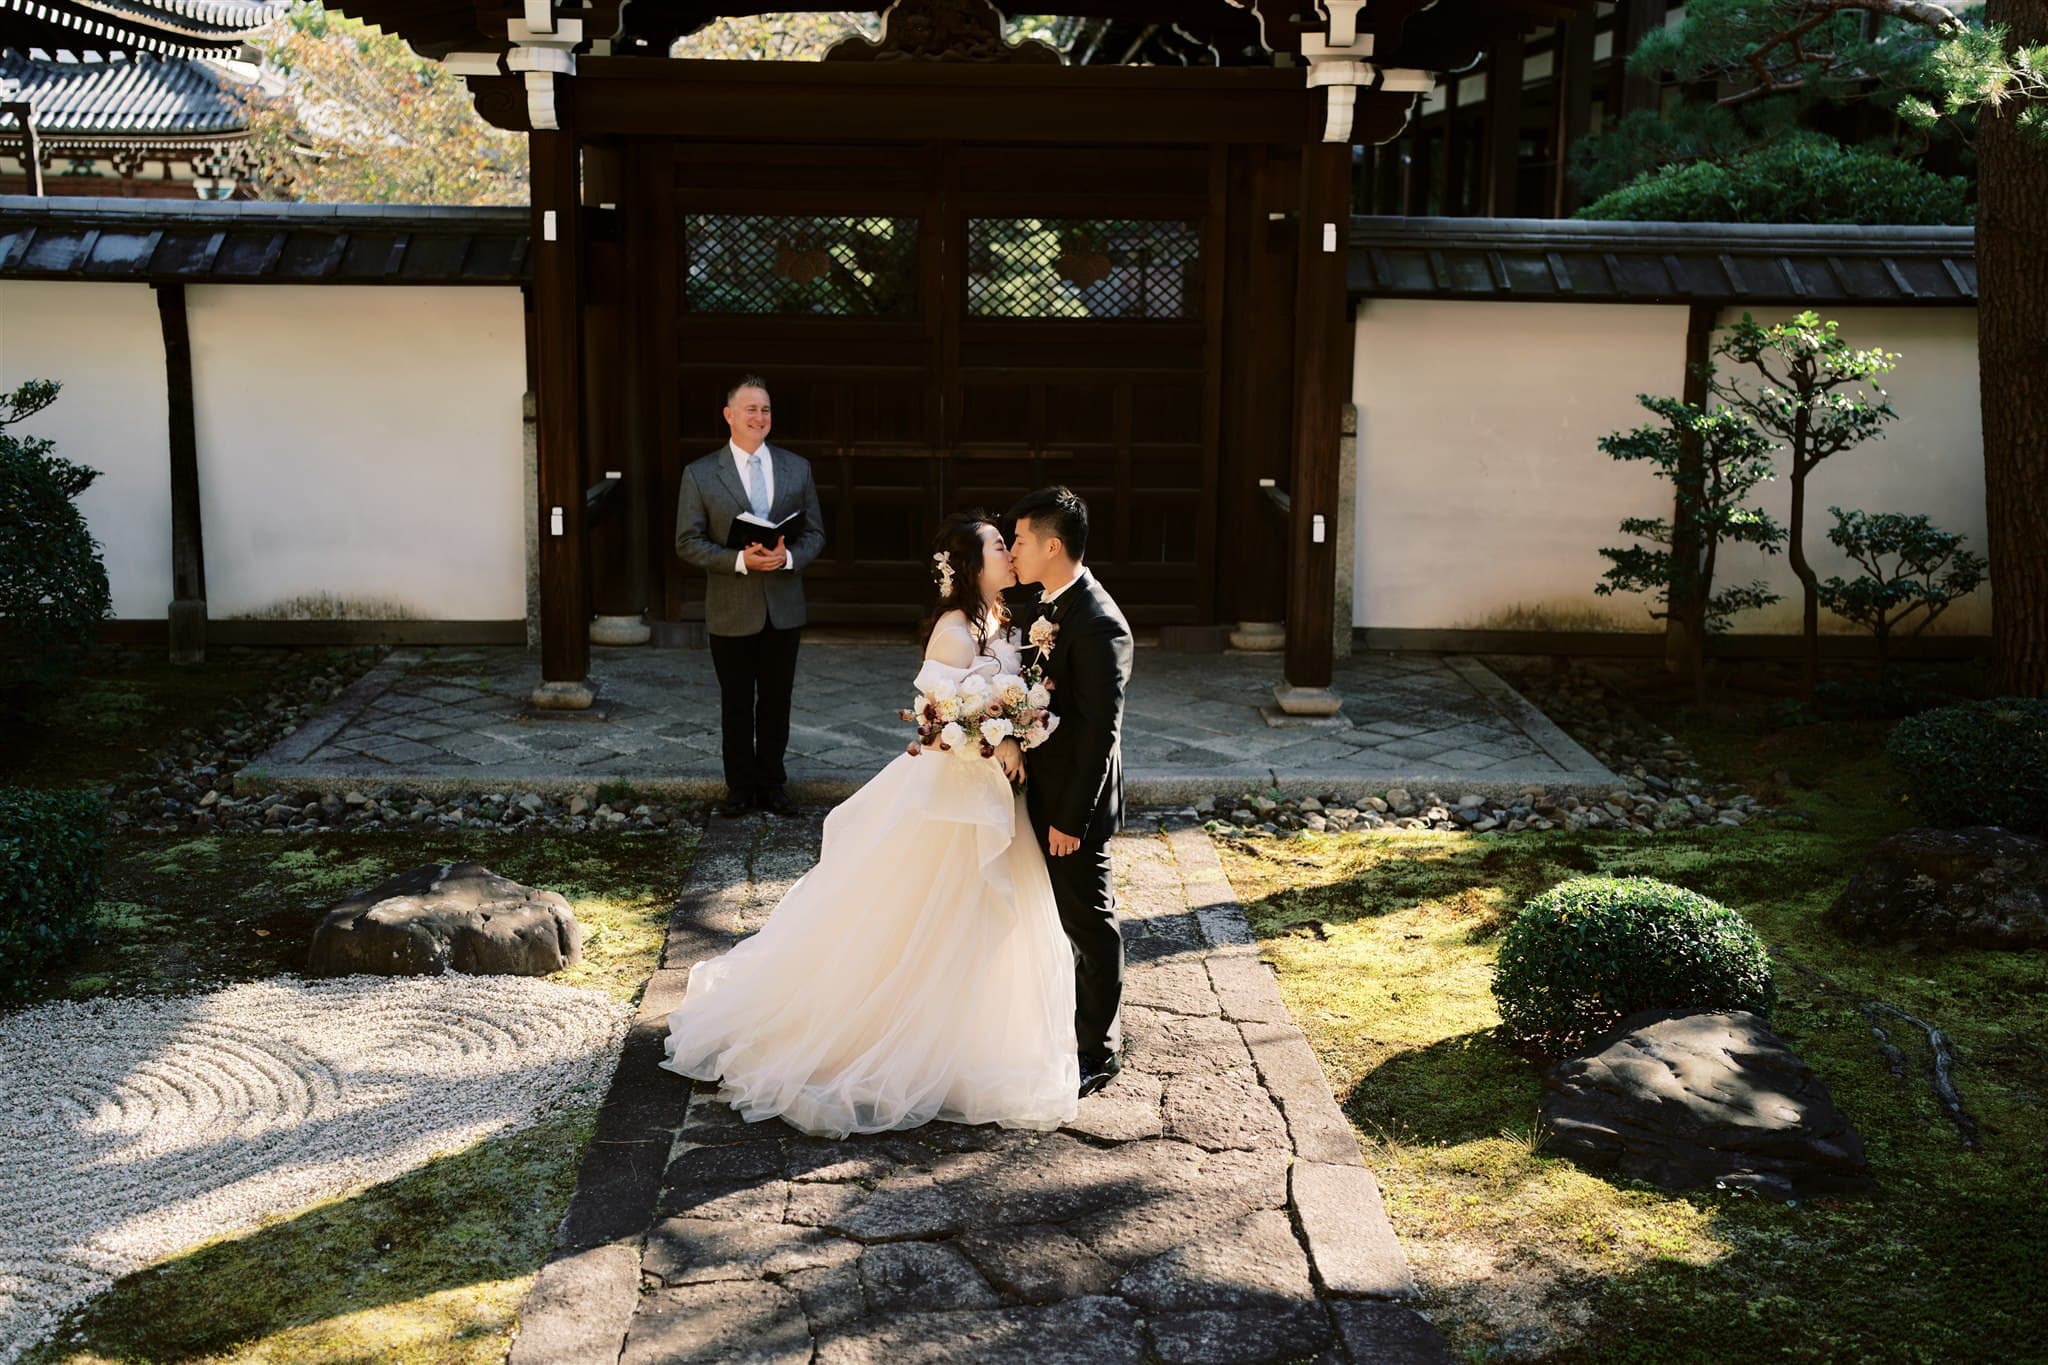 Kyoto Tokyo Japan Elopement Wedding Photographer, Planner & Videographer | A bride and groom elegantly captured by a Japan elopement photographer amidst the enchanting backdrop of a Japanese garden.